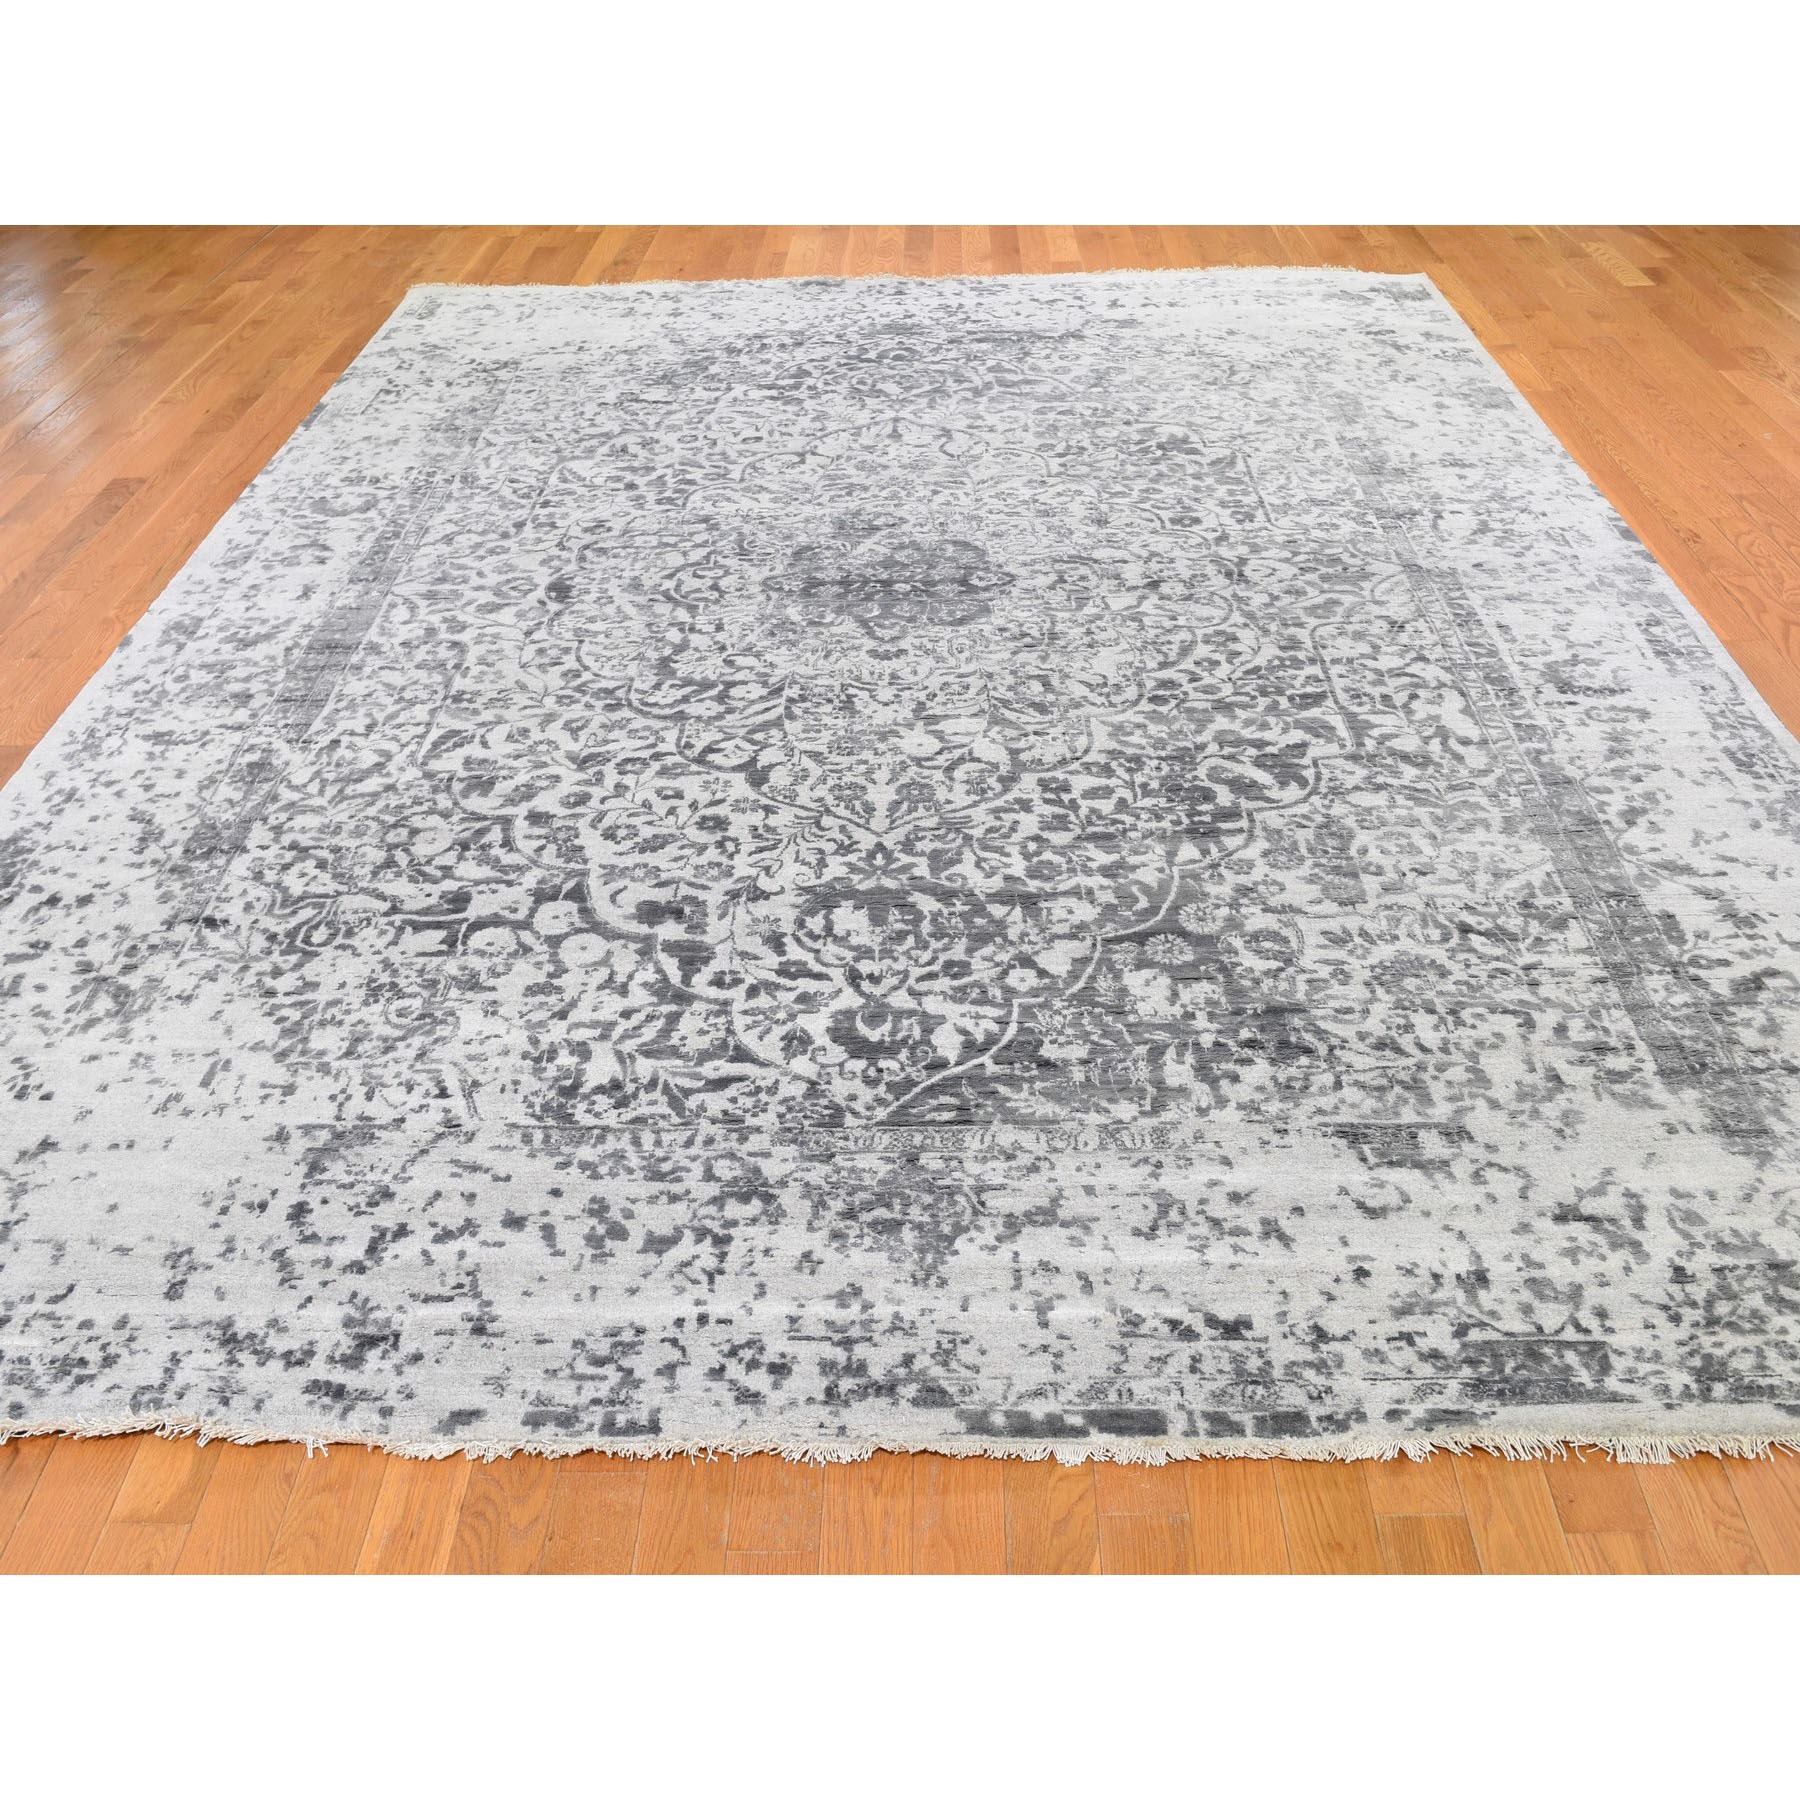 9-x12- Silver-Dark Gray Erased Persian Design Wool and Pure Silk Hand Knotted Oriental Rug 